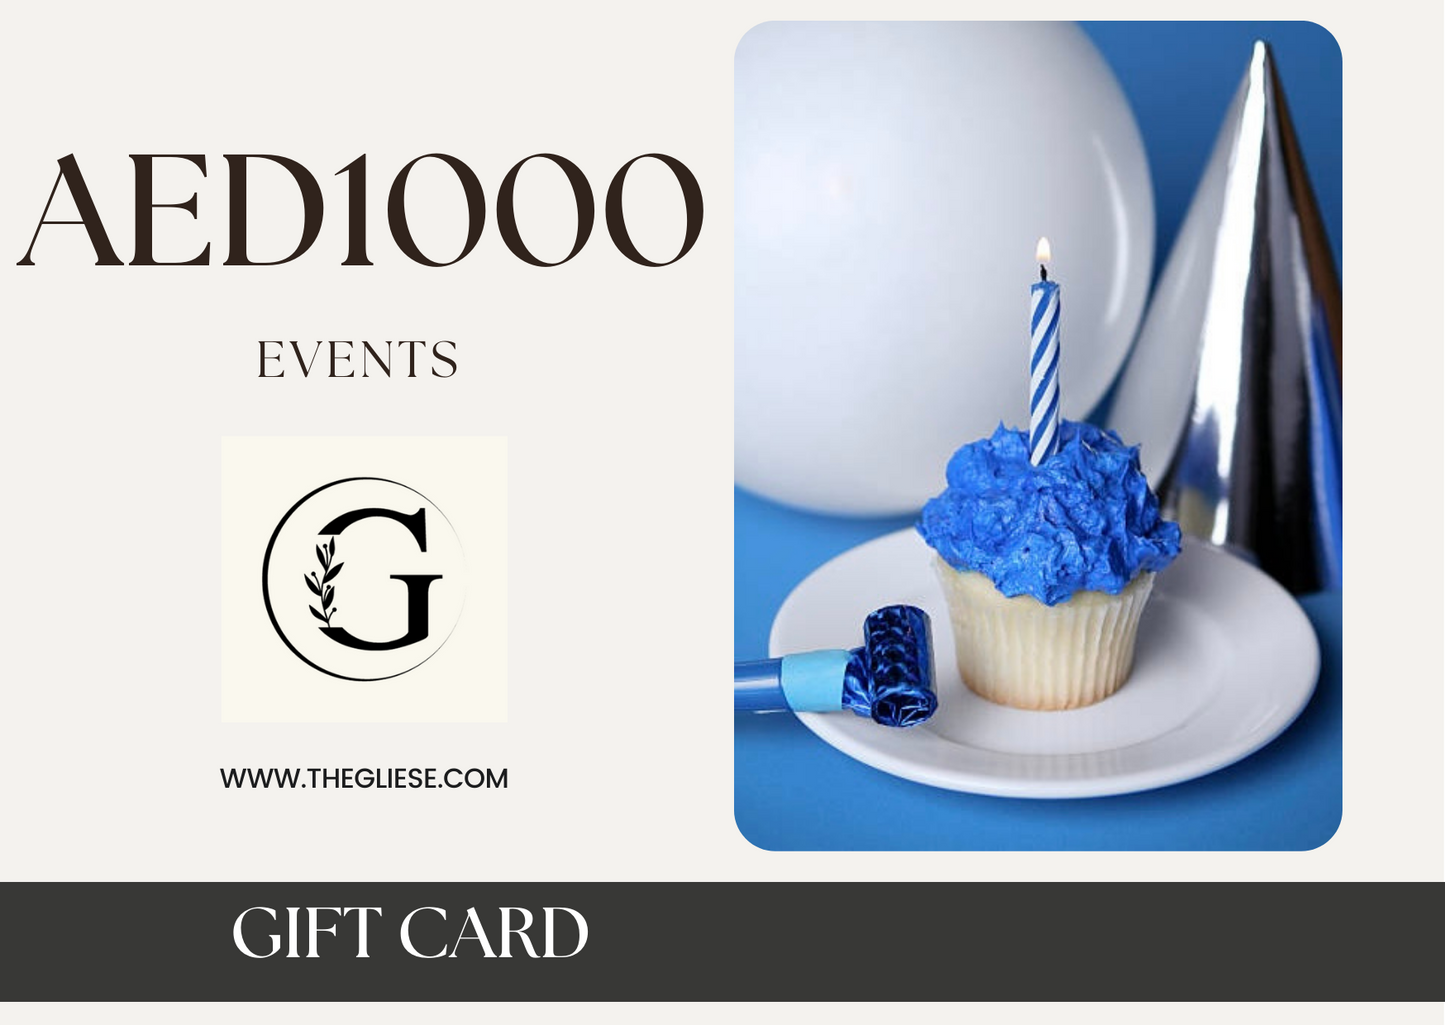 Event GIFT CARD